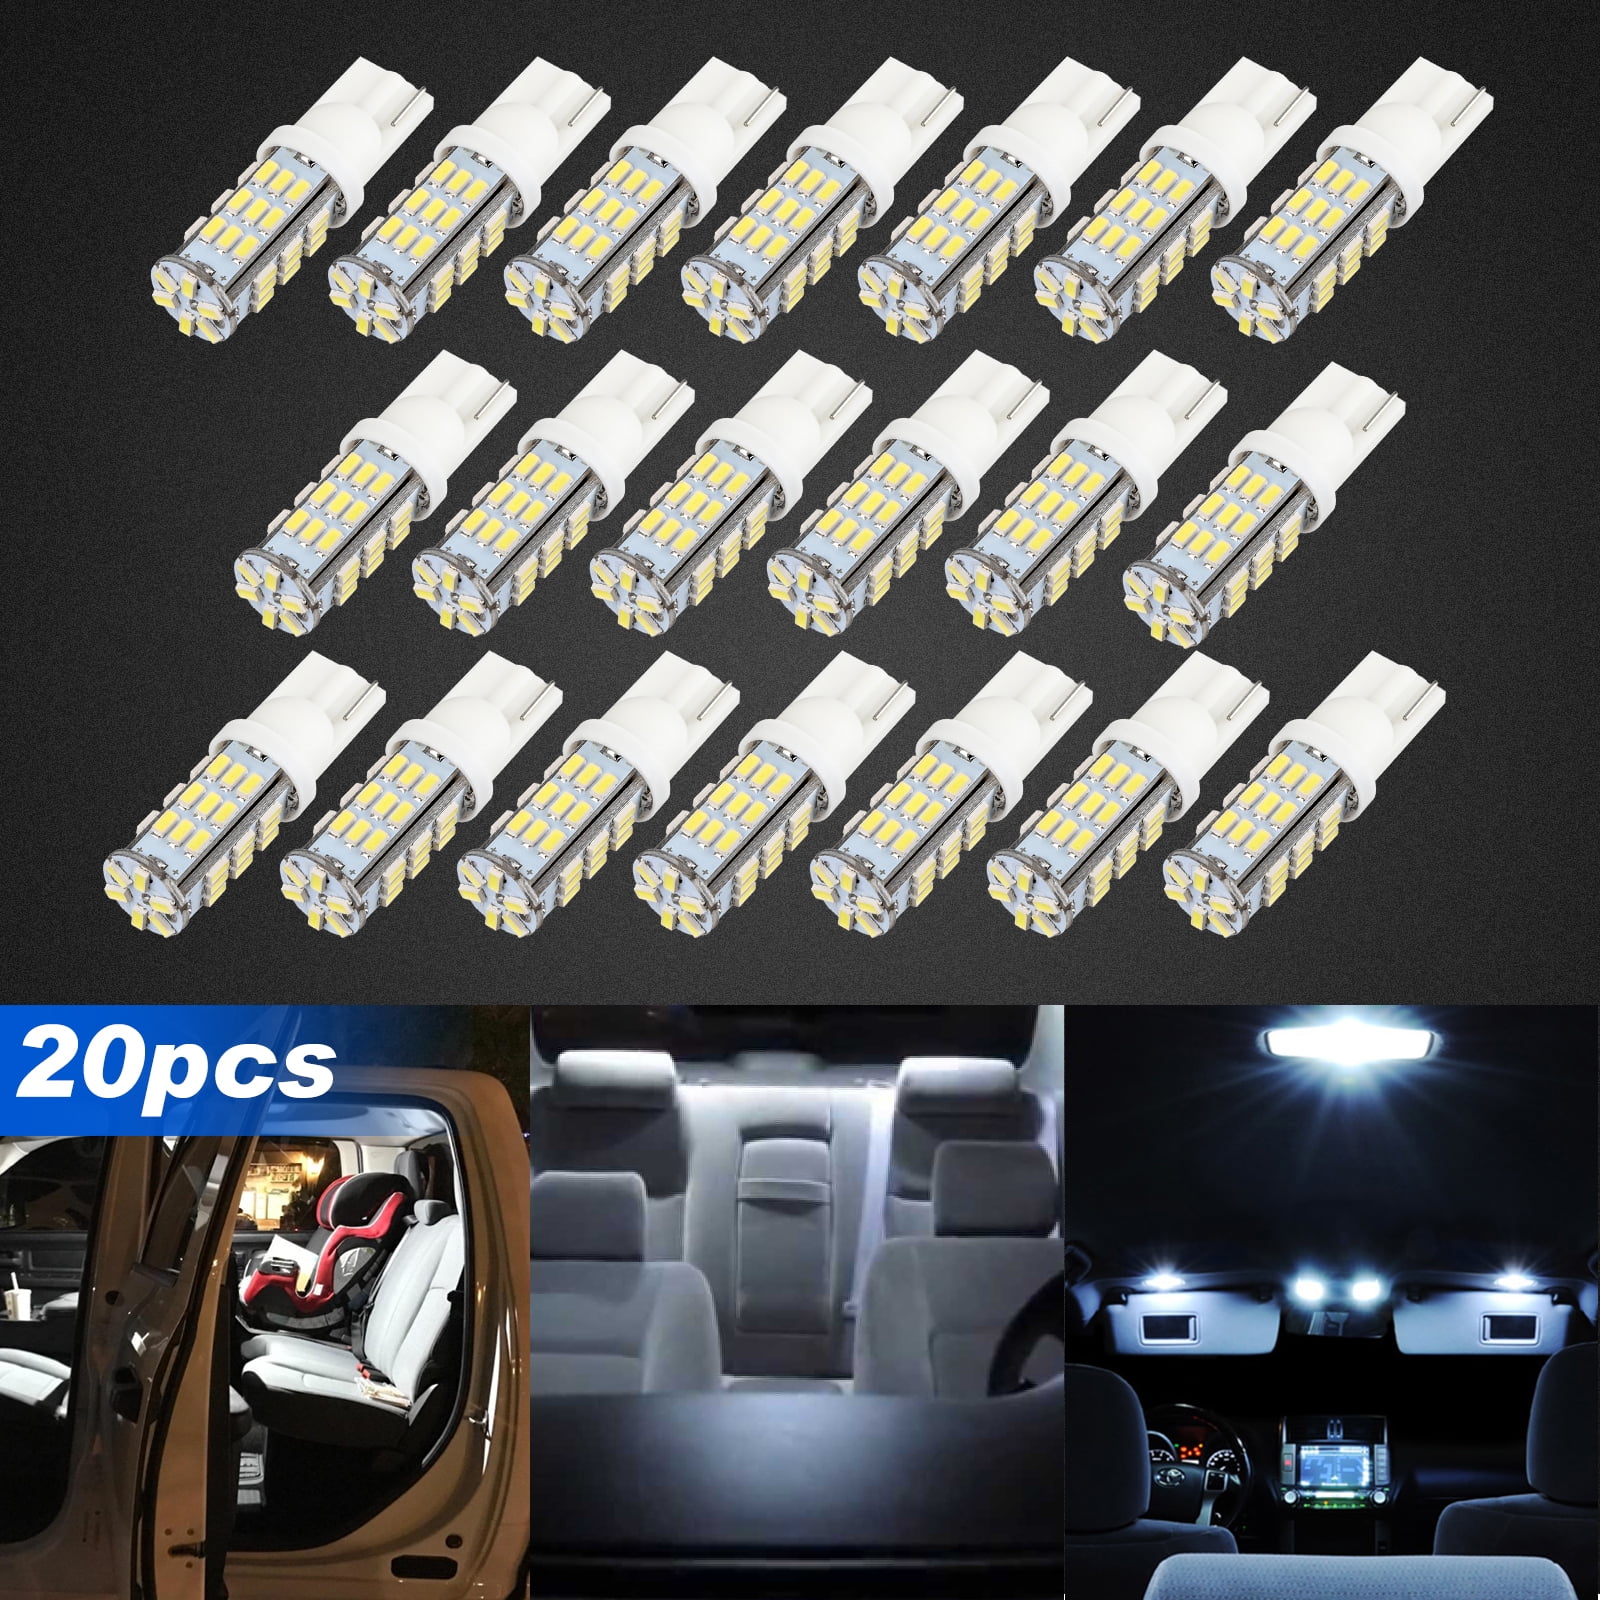 194 T10 LED Light Bulb 6500K White On Sale Pack of 10 Extremely Bright 3030 Chipset 2SMD 168 2825 W5W 3030 Wedge Light 2W 12V LED Bulbs Error Free for Car Dome Map Door Courtesy License Plate Light